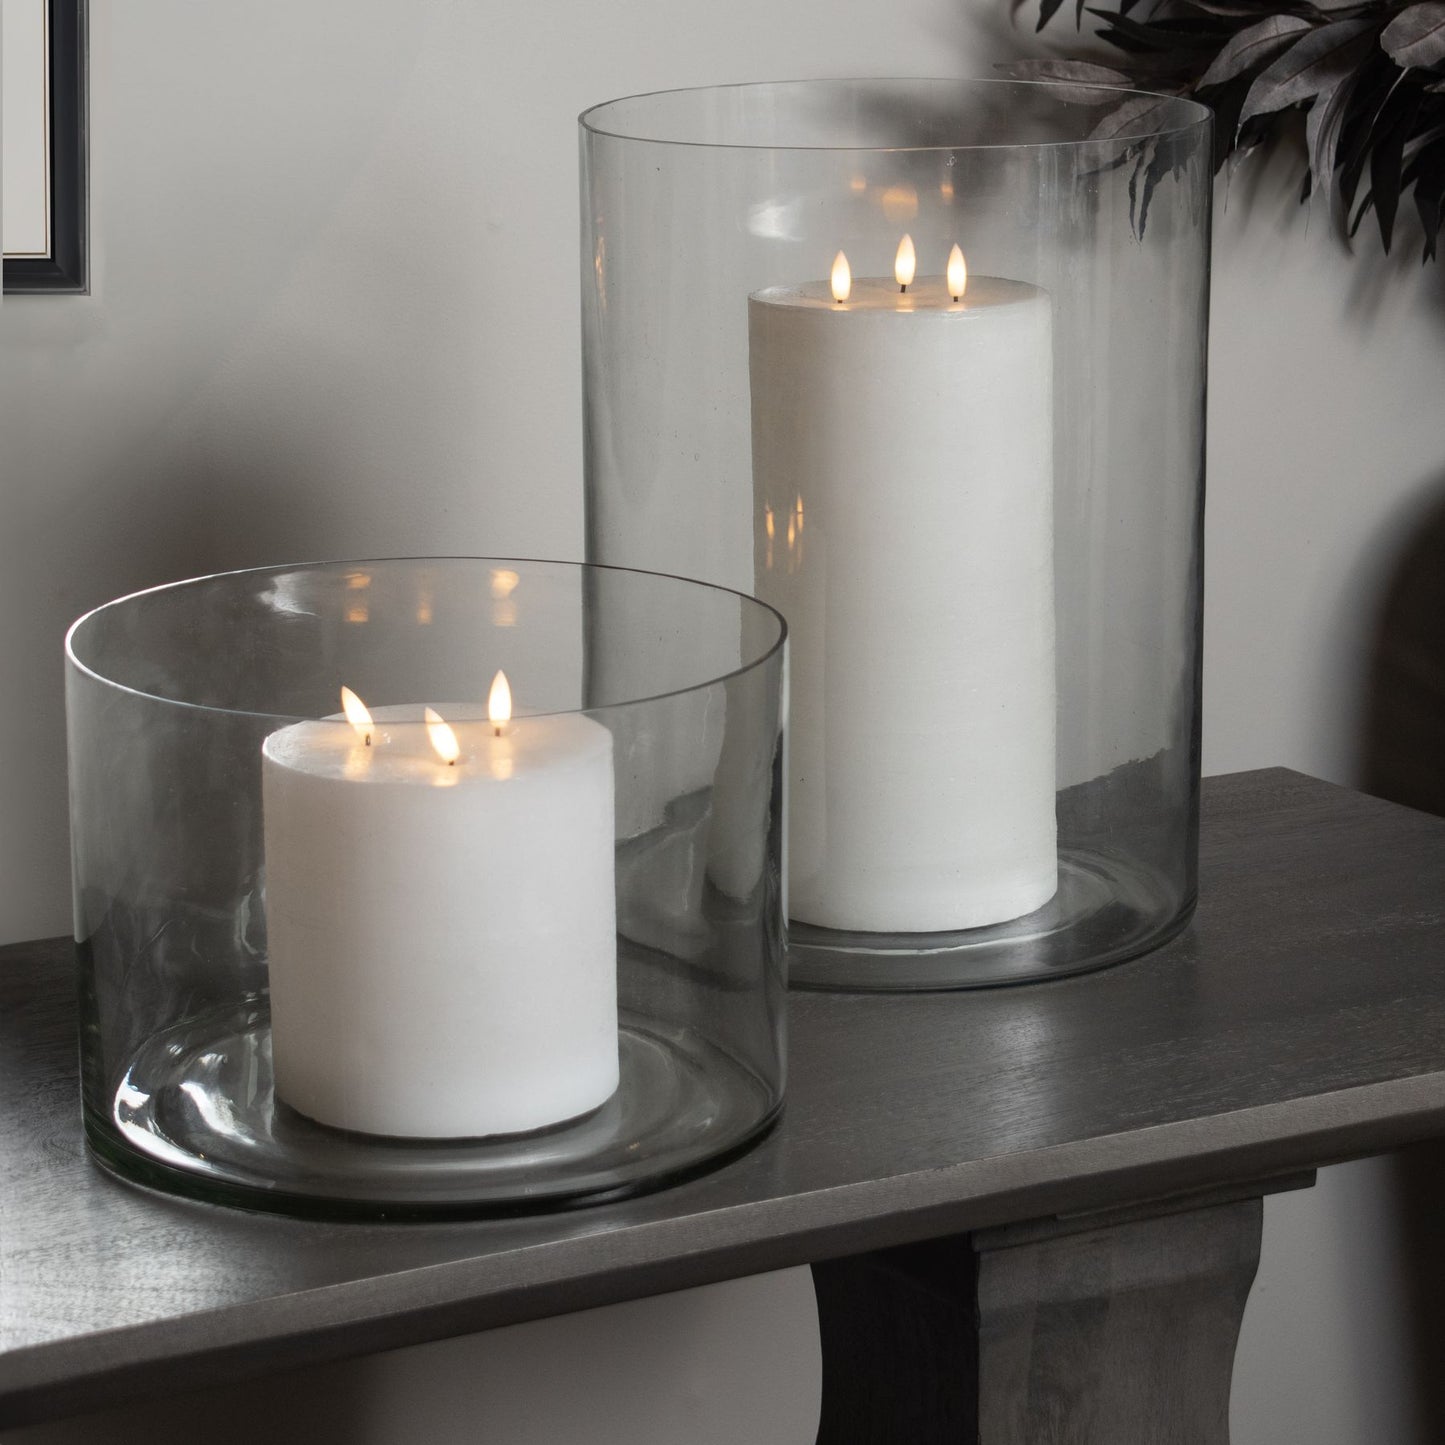 White LED 3 Wick Pillar Candle with Flickering Flame 15x15cm